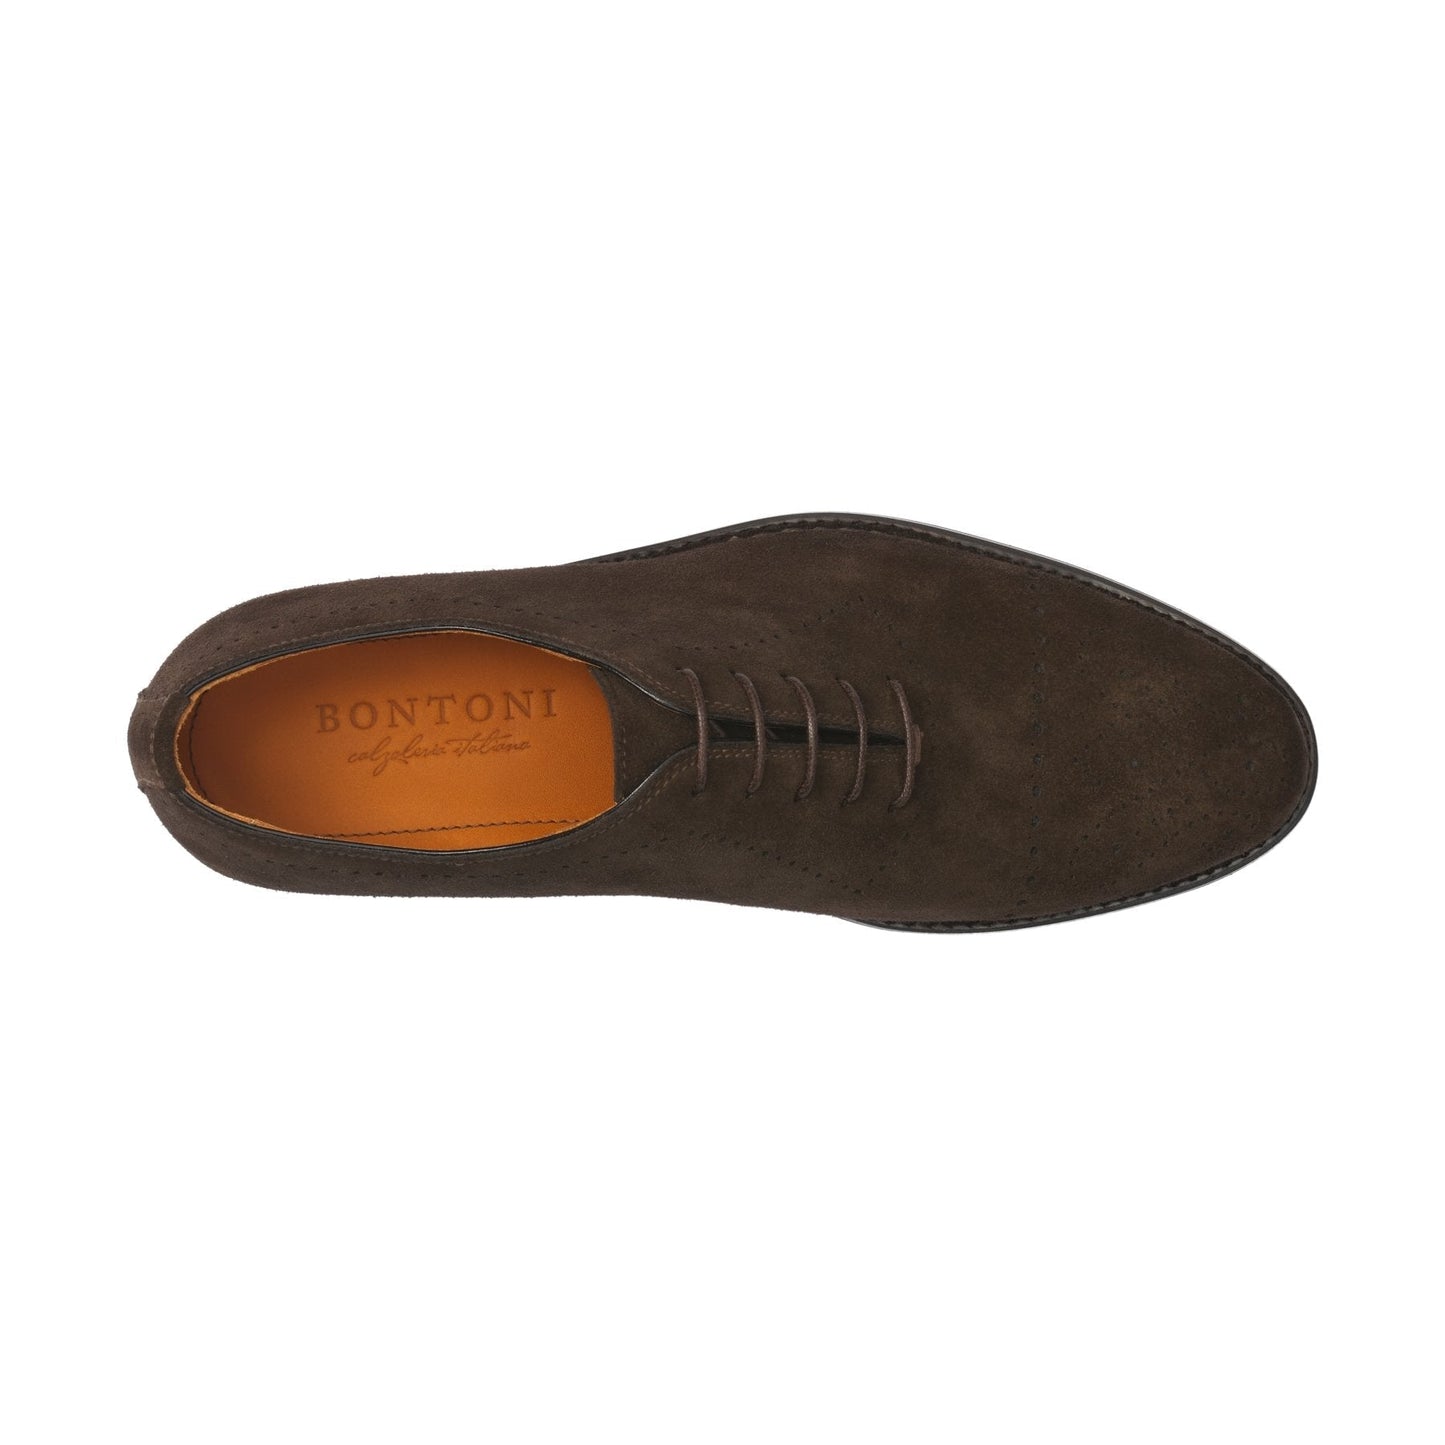 Bontoni «Brera» Five-Eyelet Oxford Suede Shoes with Perforated Details and Medallion in Dark Brown - SARTALE